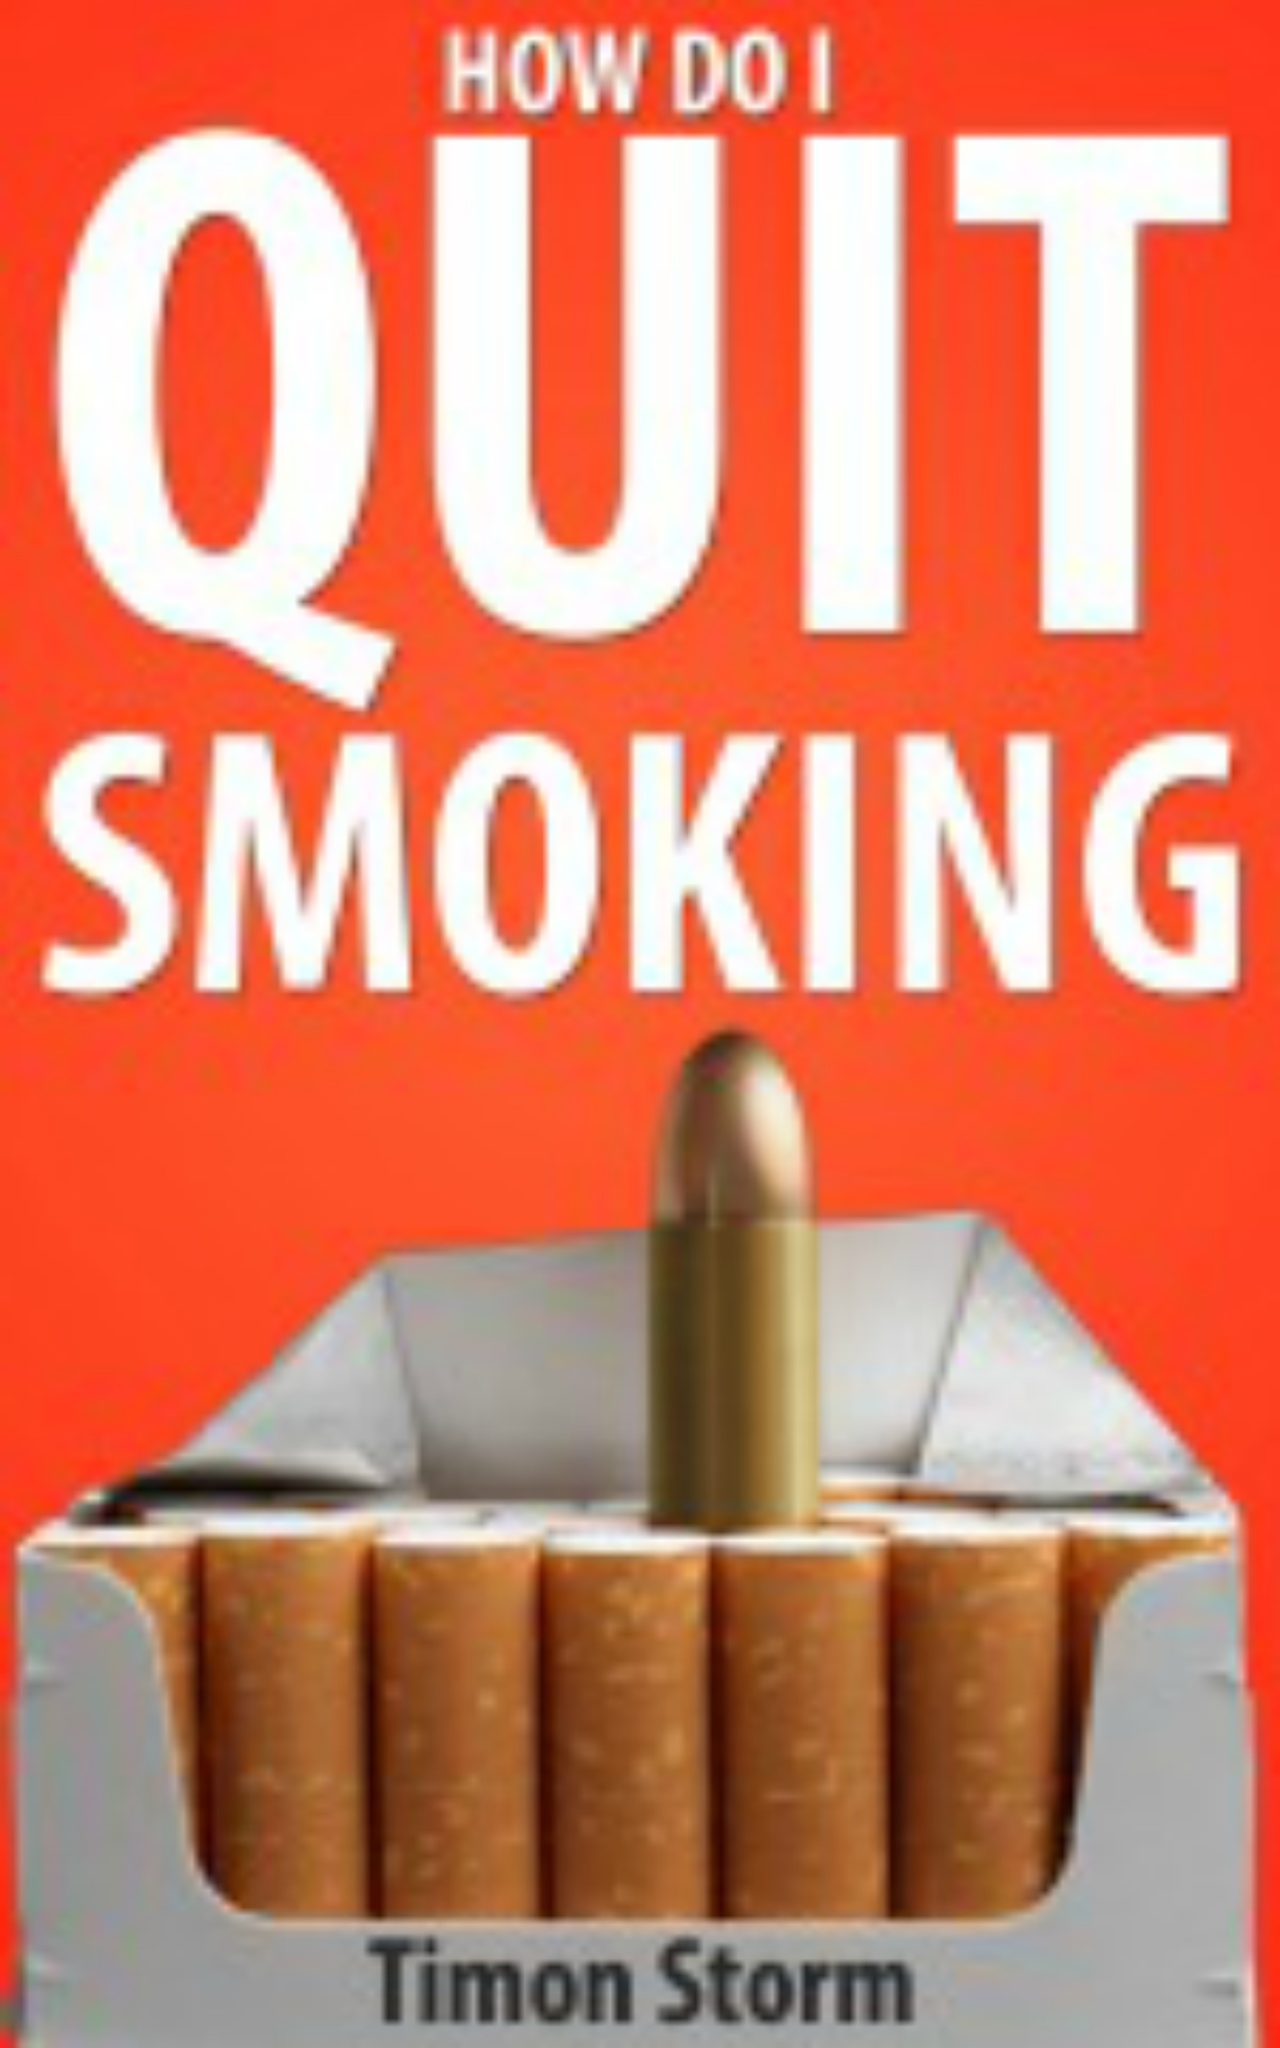 How do I Quit Smoking by Timon Storm